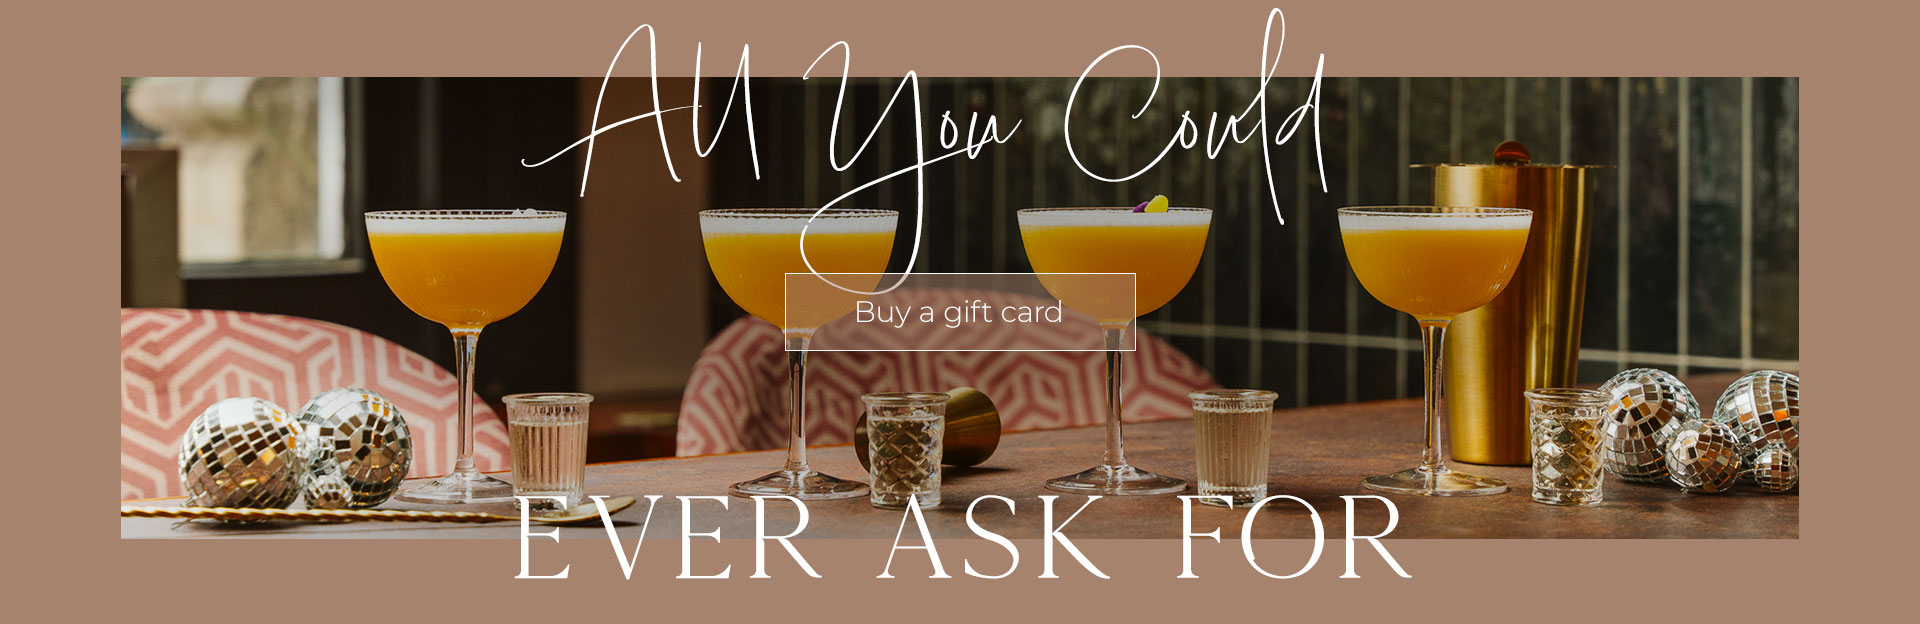 All Bar One Gift Cards at All Bar One Trafford Centre